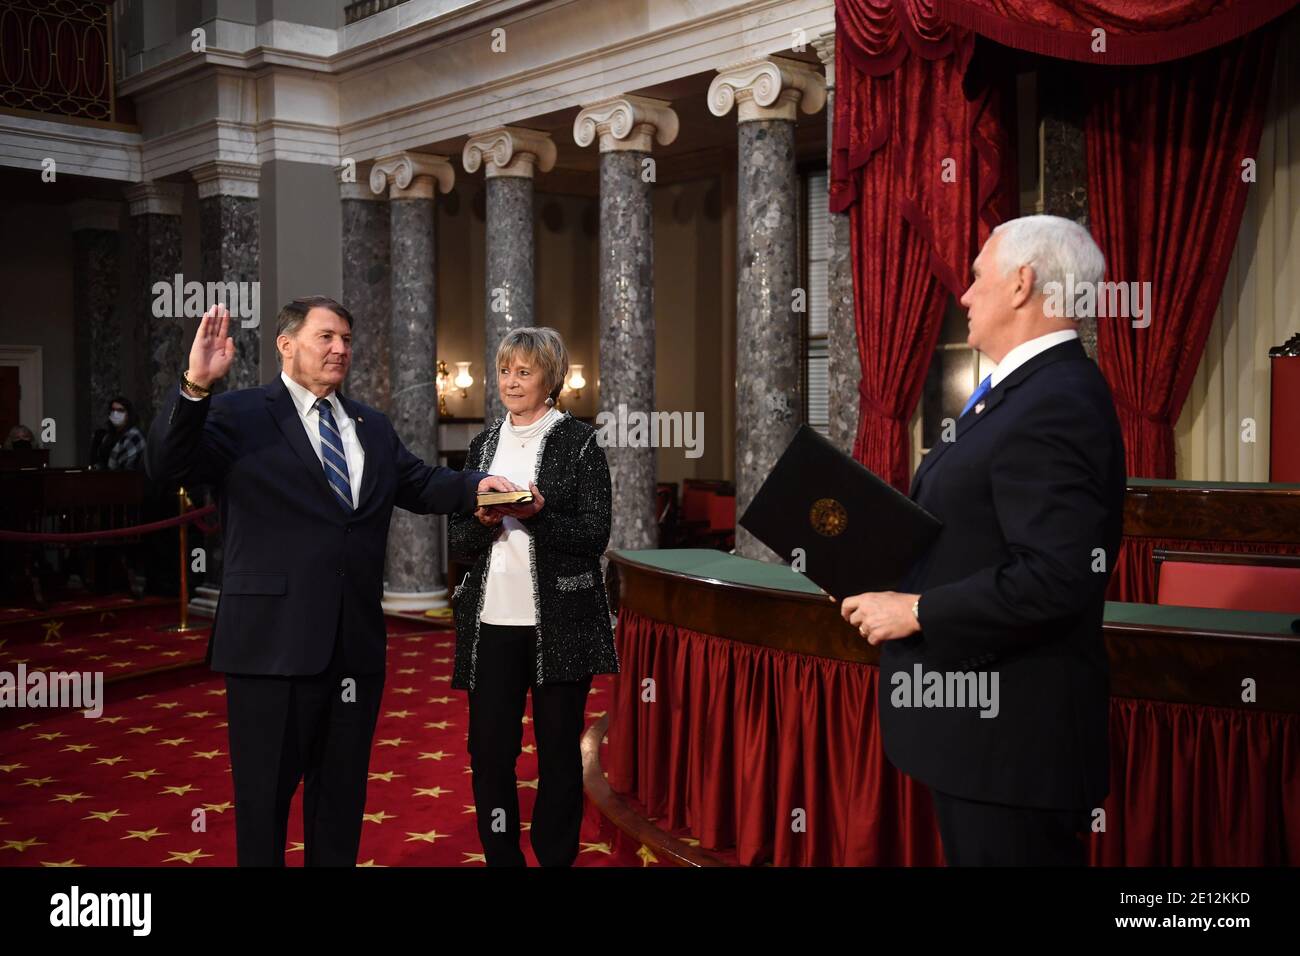 United States Senator Mike Rounds (Republican of South Dakota), participates in a mock swearing-in for the 117th Congress with Vice President Mike Pence, as his wife Jean Rounds holds a bible, in the Old Senate Chambers at the U.S. Capitol Building in Washington, DC on Sunday, January 3, 2021. Credit: Kevin Dietsch/Pool via CNP/MediaPunch Stock Photo